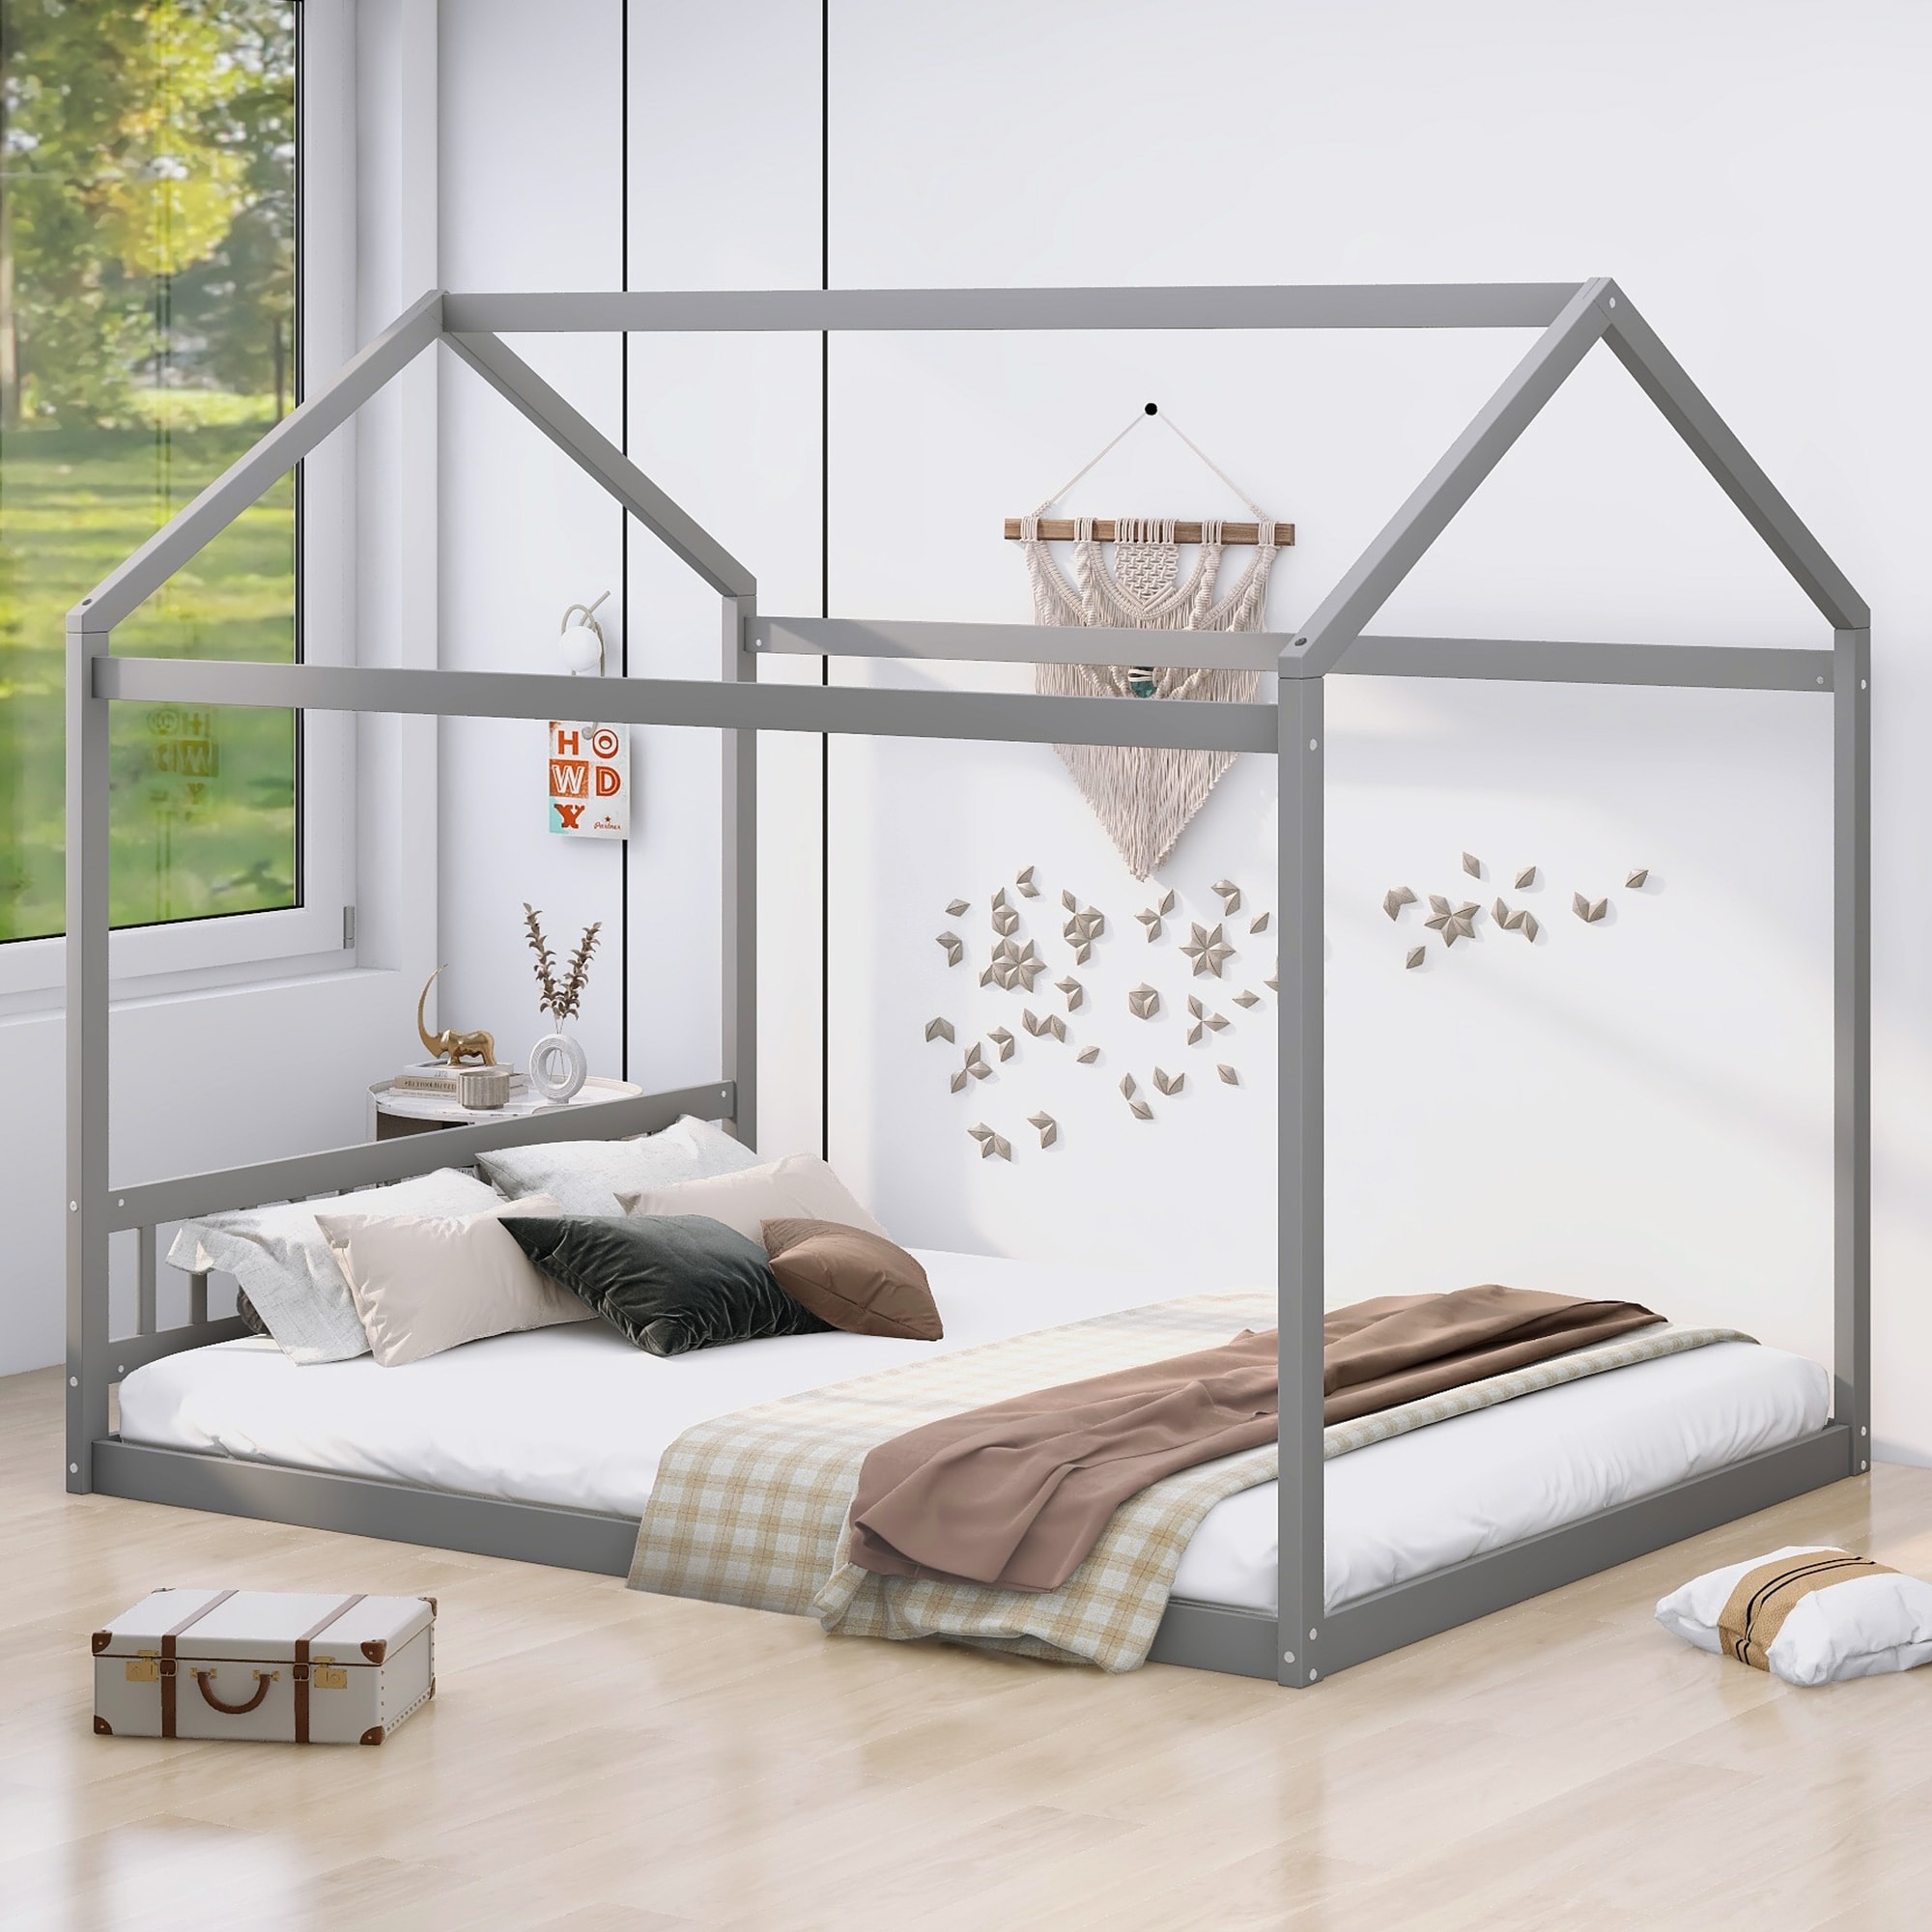 Queen Size Wooden House Bed with Headboard, Mosquito Net Top